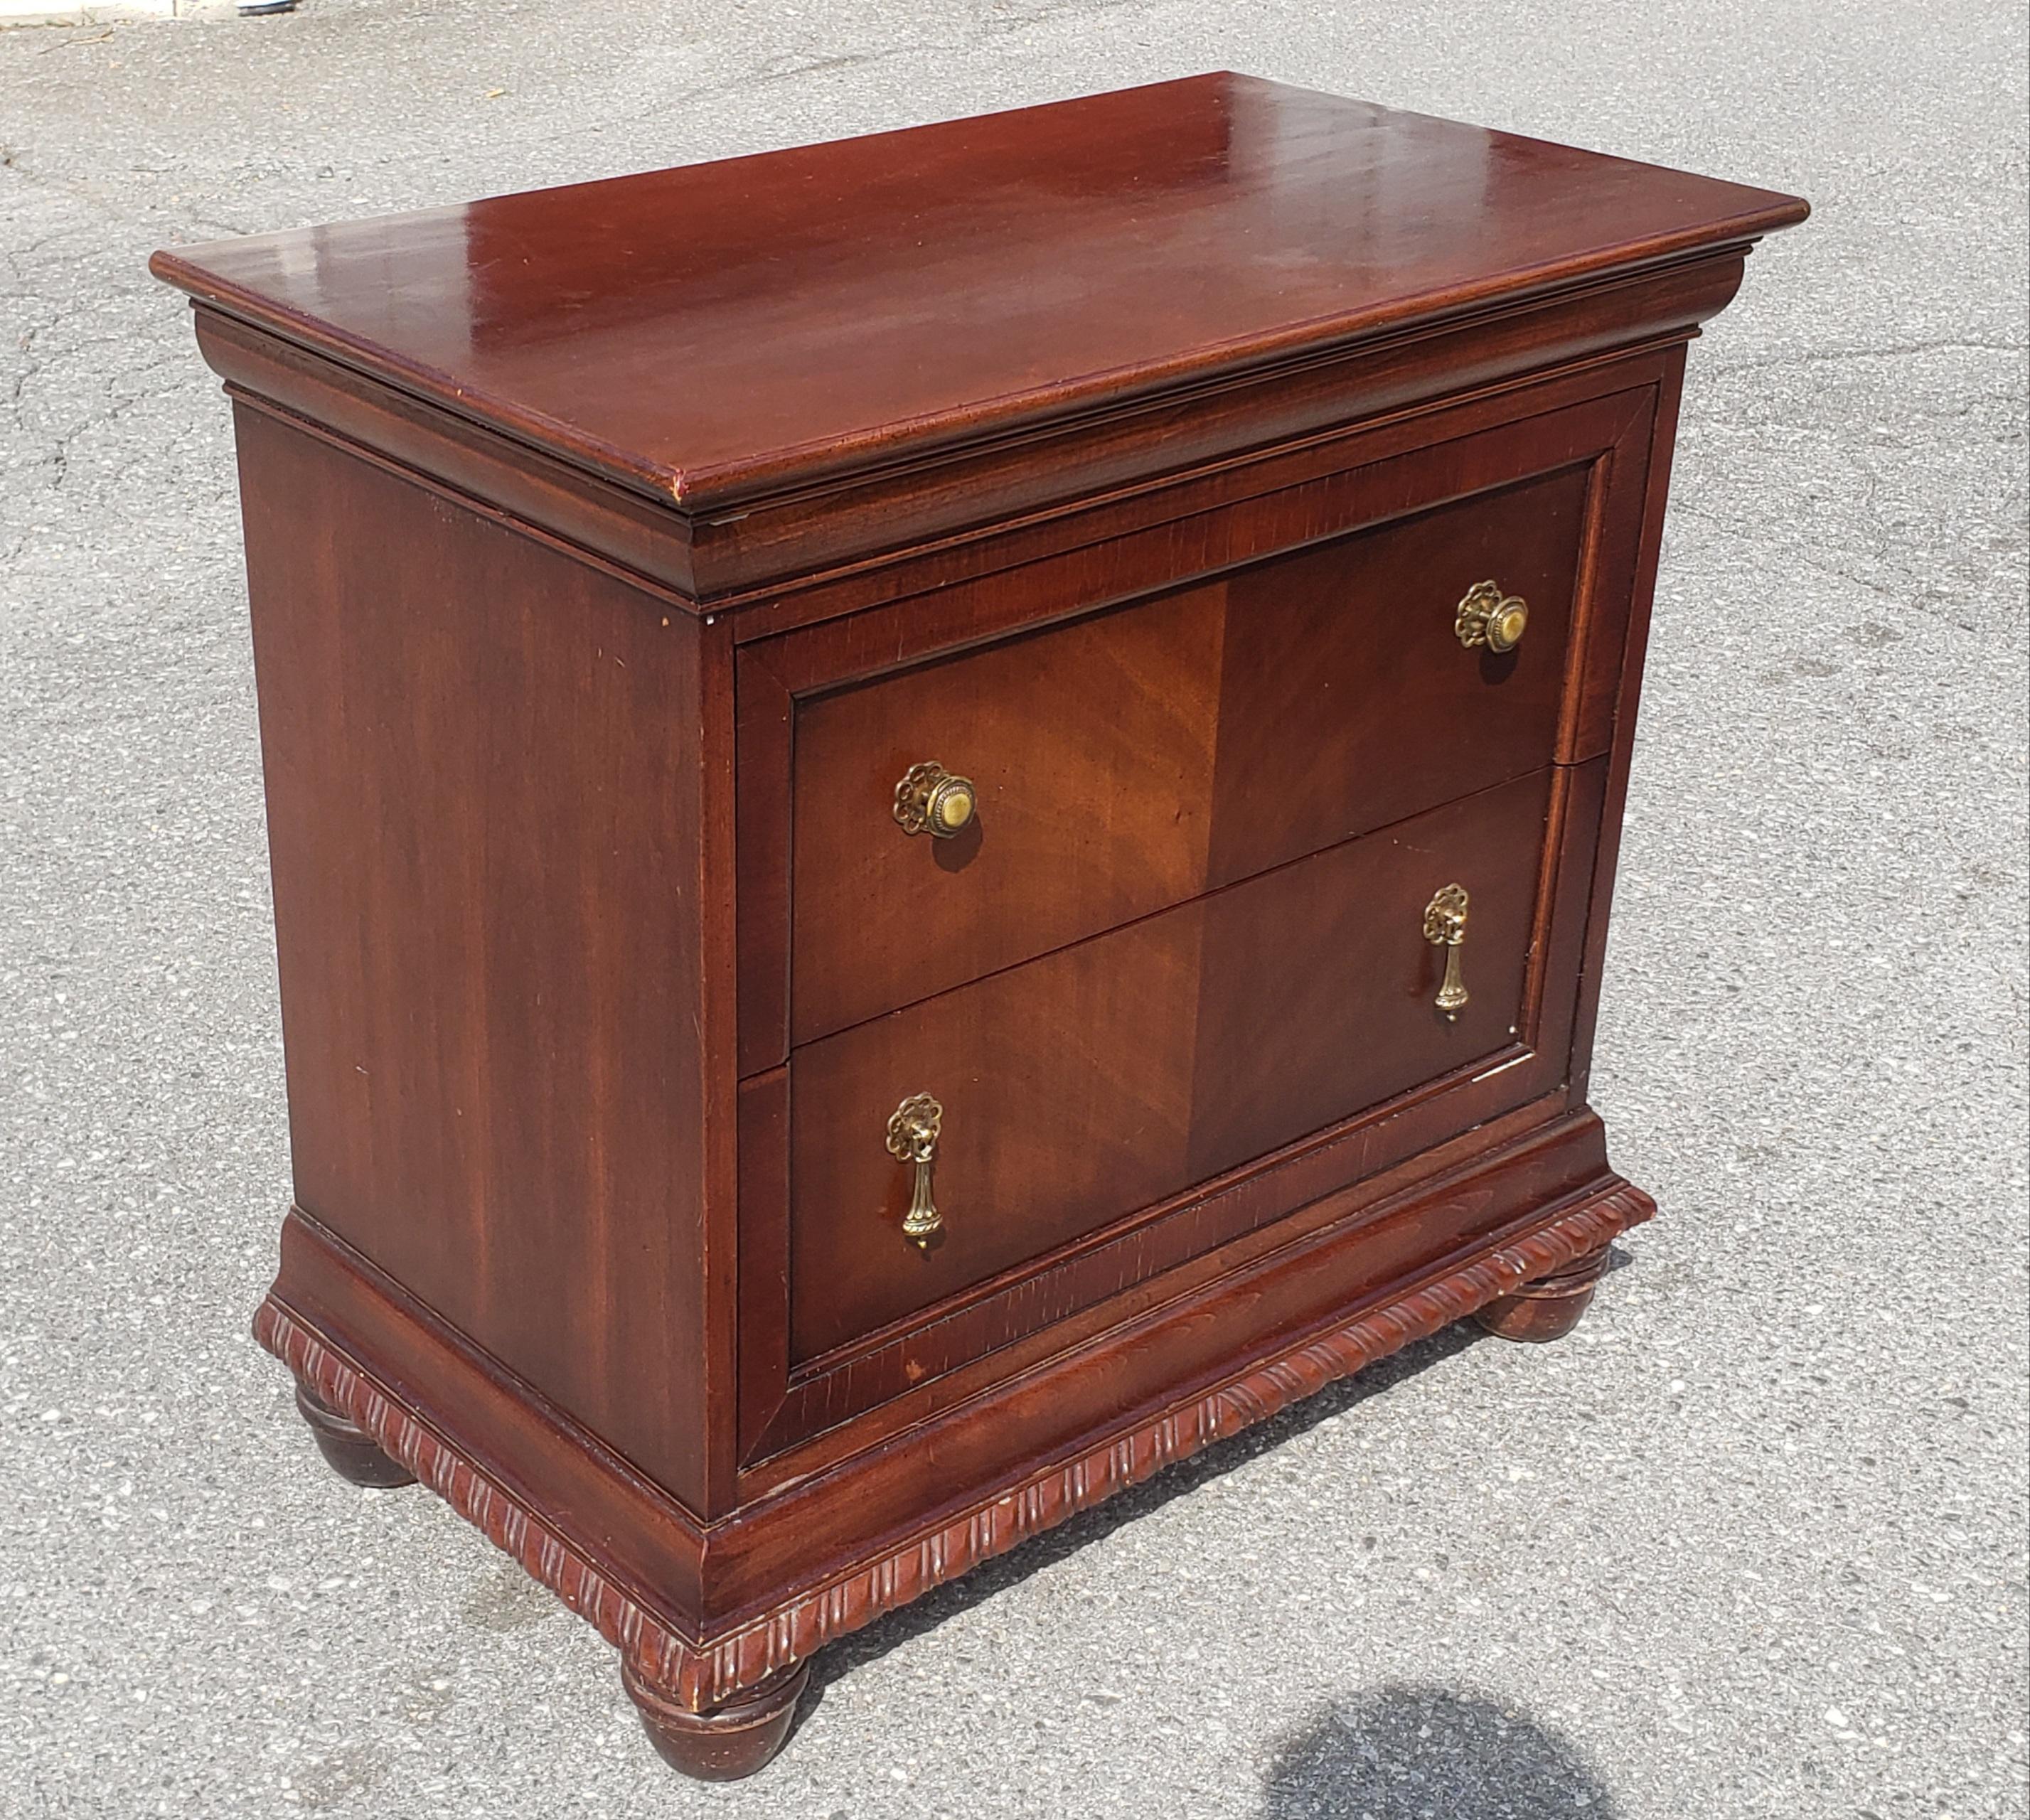 American National Mt Airy Bookmatched Mahogany Bedside Chest of Drawers / Nighstand For Sale